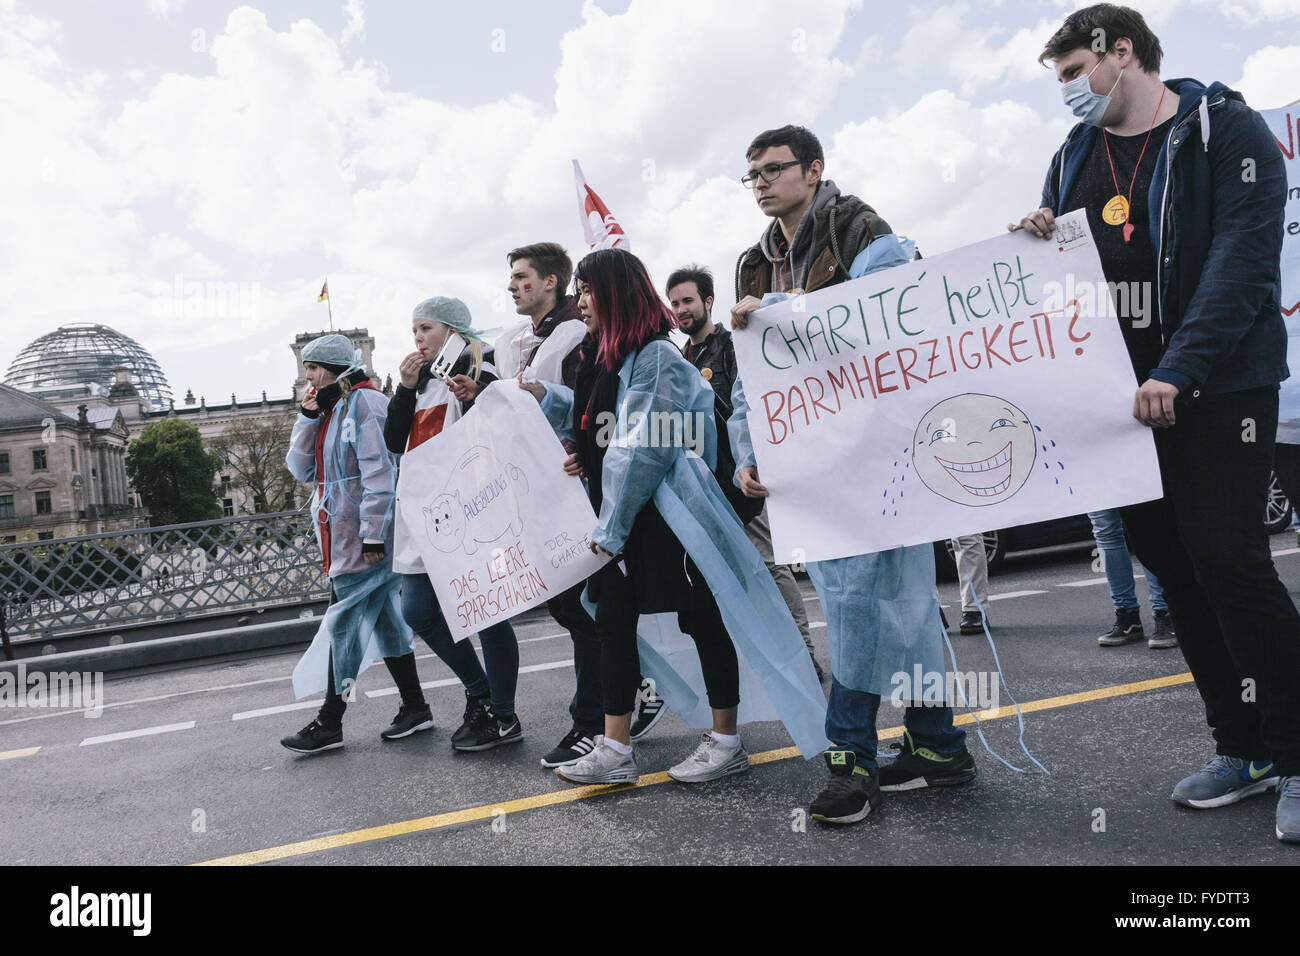 Berlin, Berlin, Germany. 26th Apr, 2016. Protesters during the demonstration of employees of Charite and Vivantes. The trade union ver.di has again expanded the scope of strikes in the civil service. Verdi asks six percent more pay for workers in the trade dispute, the third round of negotiations is scheduled for April 28 and 29, 2016 in Potsdam, Germany. Credit:  Jan Scheunert/ZUMA Wire/Alamy Live News Stock Photo